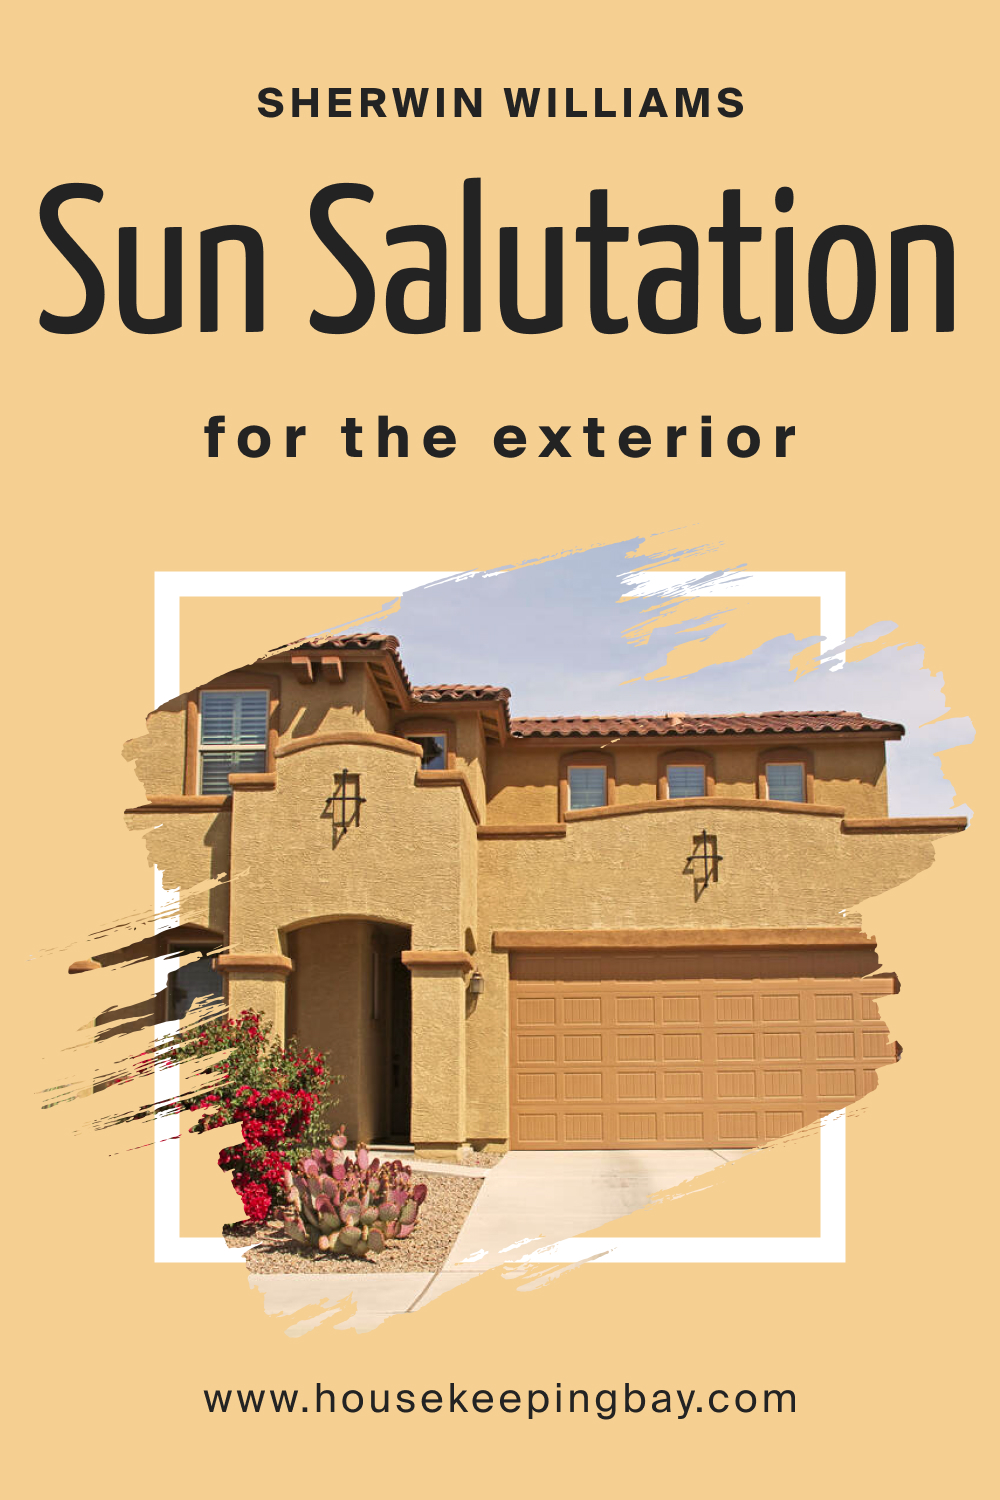 Sherwin Williams. Sun Salutation SW 9664 For the exterior